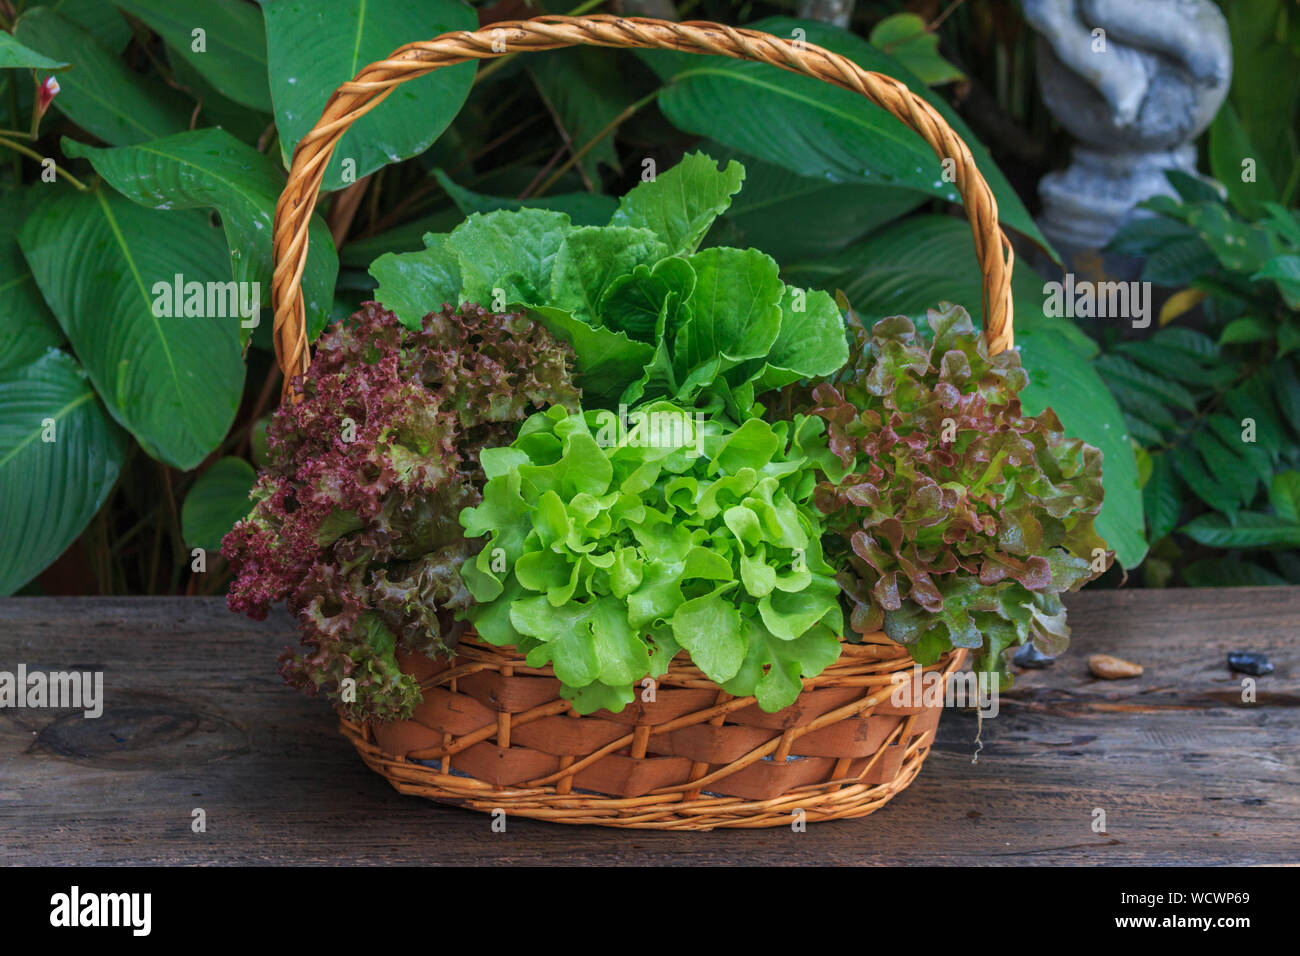 Close-up Of Fresh Green Plants Stock Photo